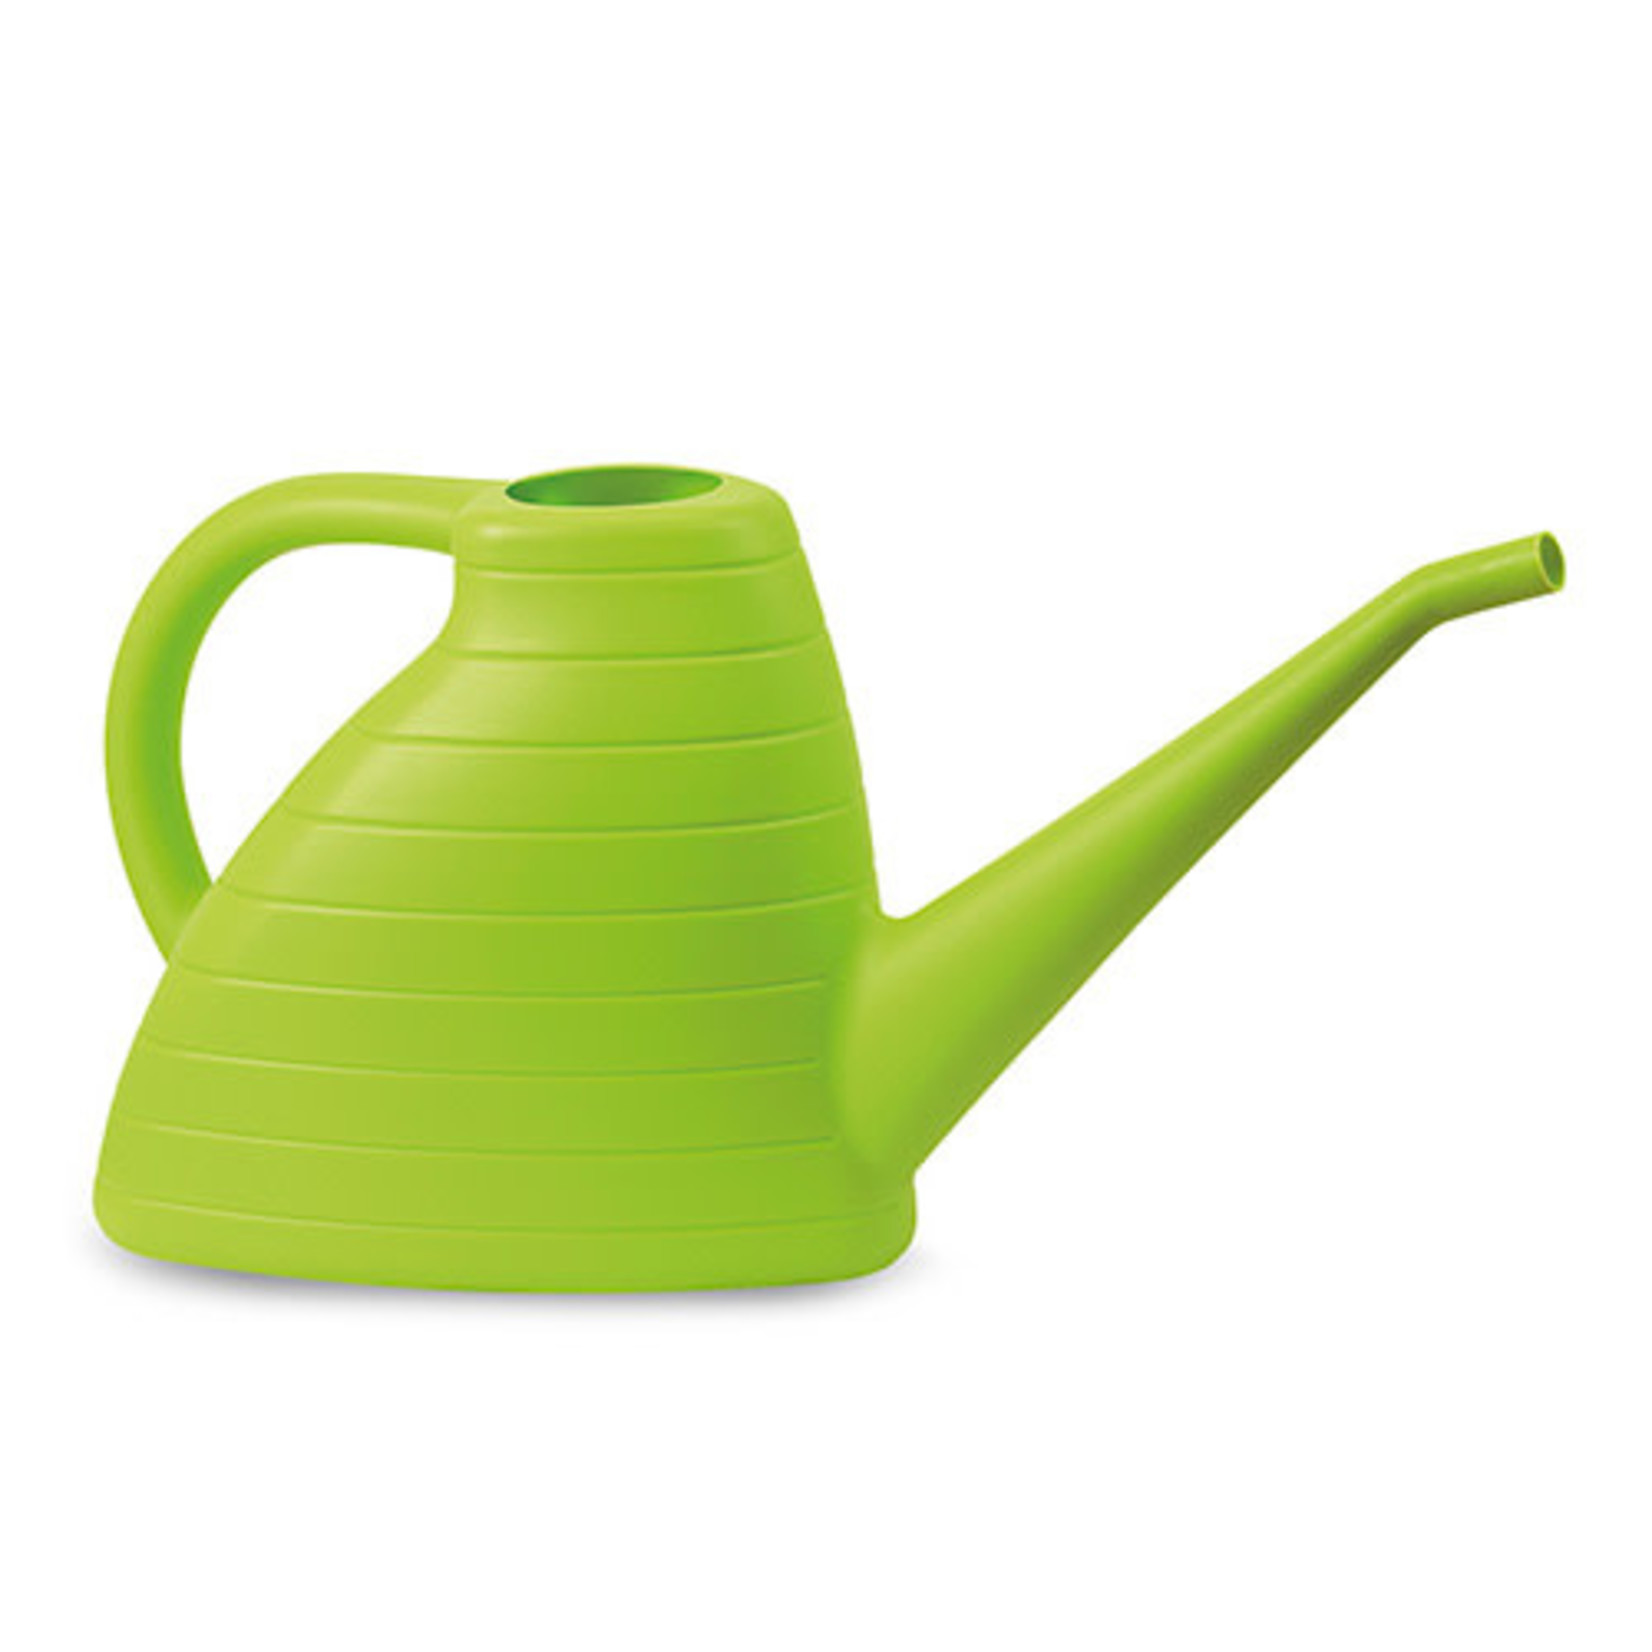 Eos Watering Can 1 gallon